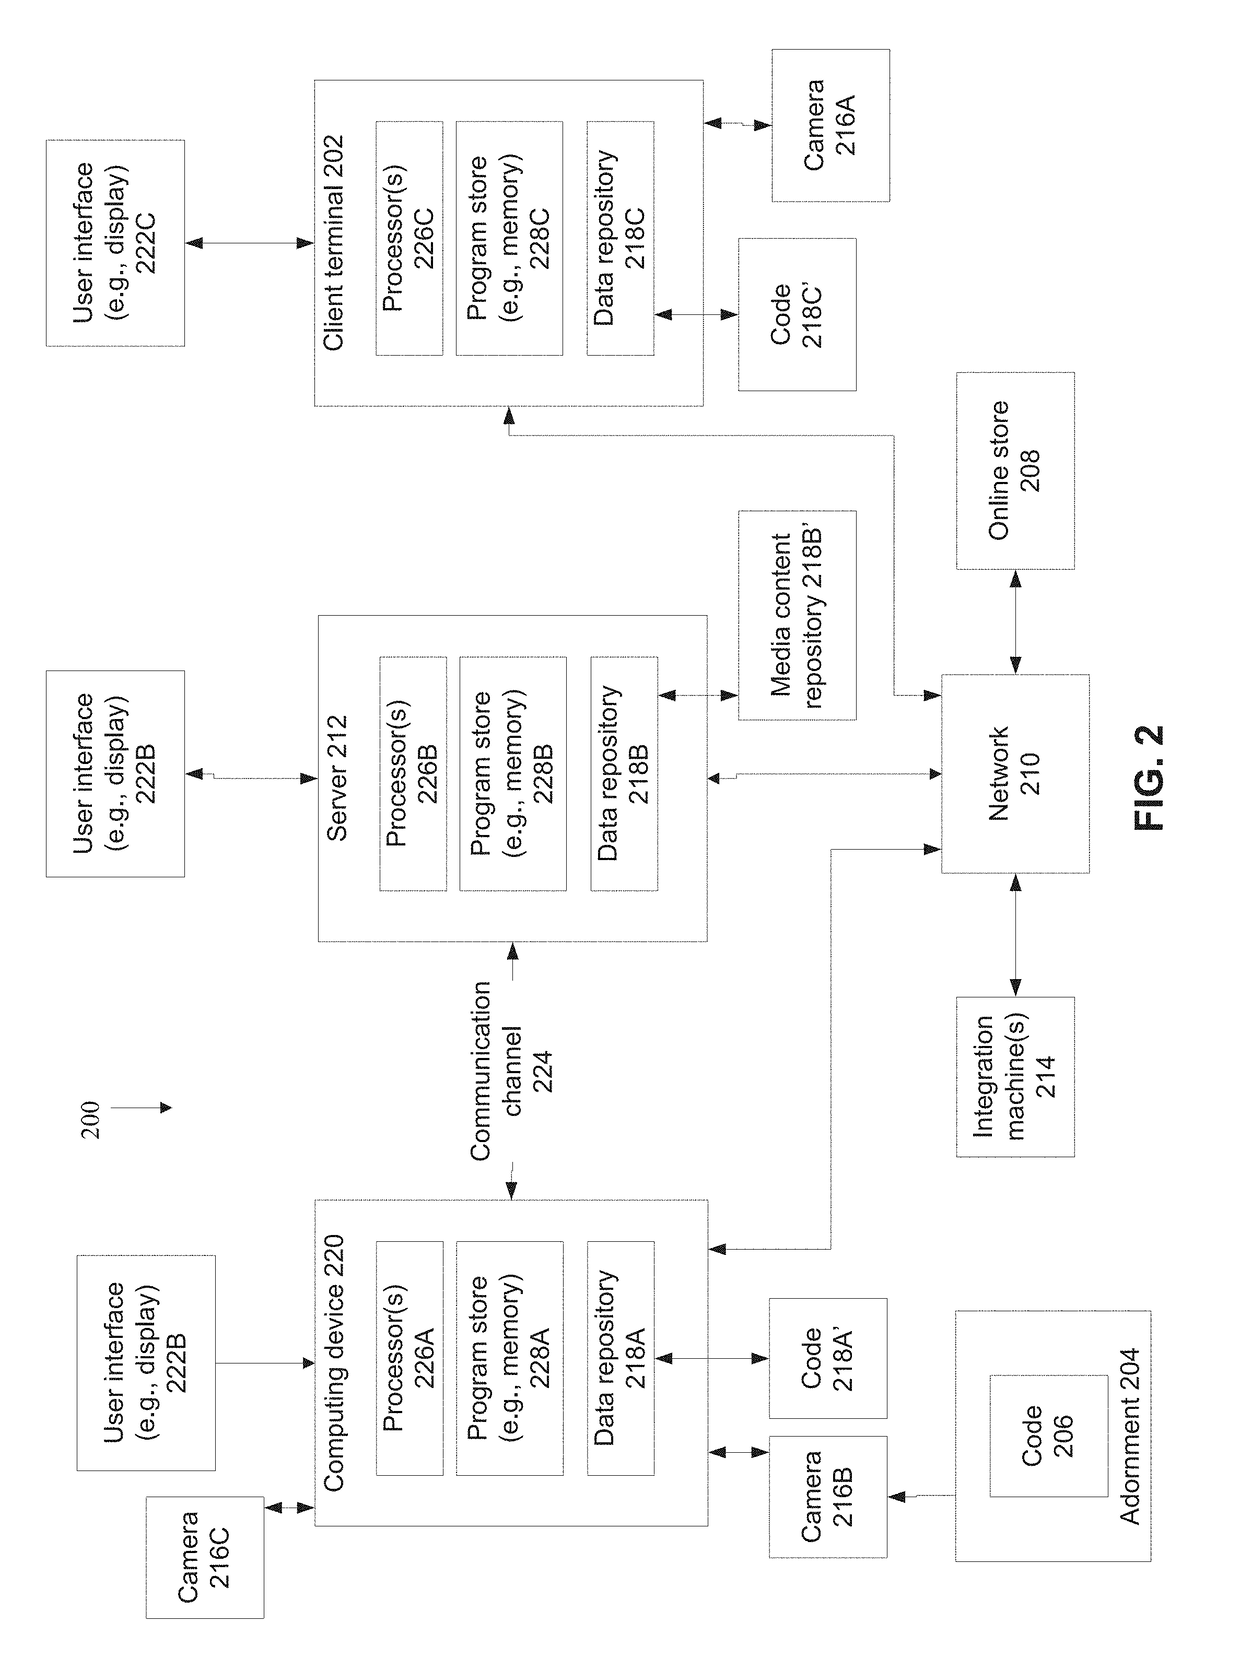 Systems and methods for establishing a communication channel based on a code